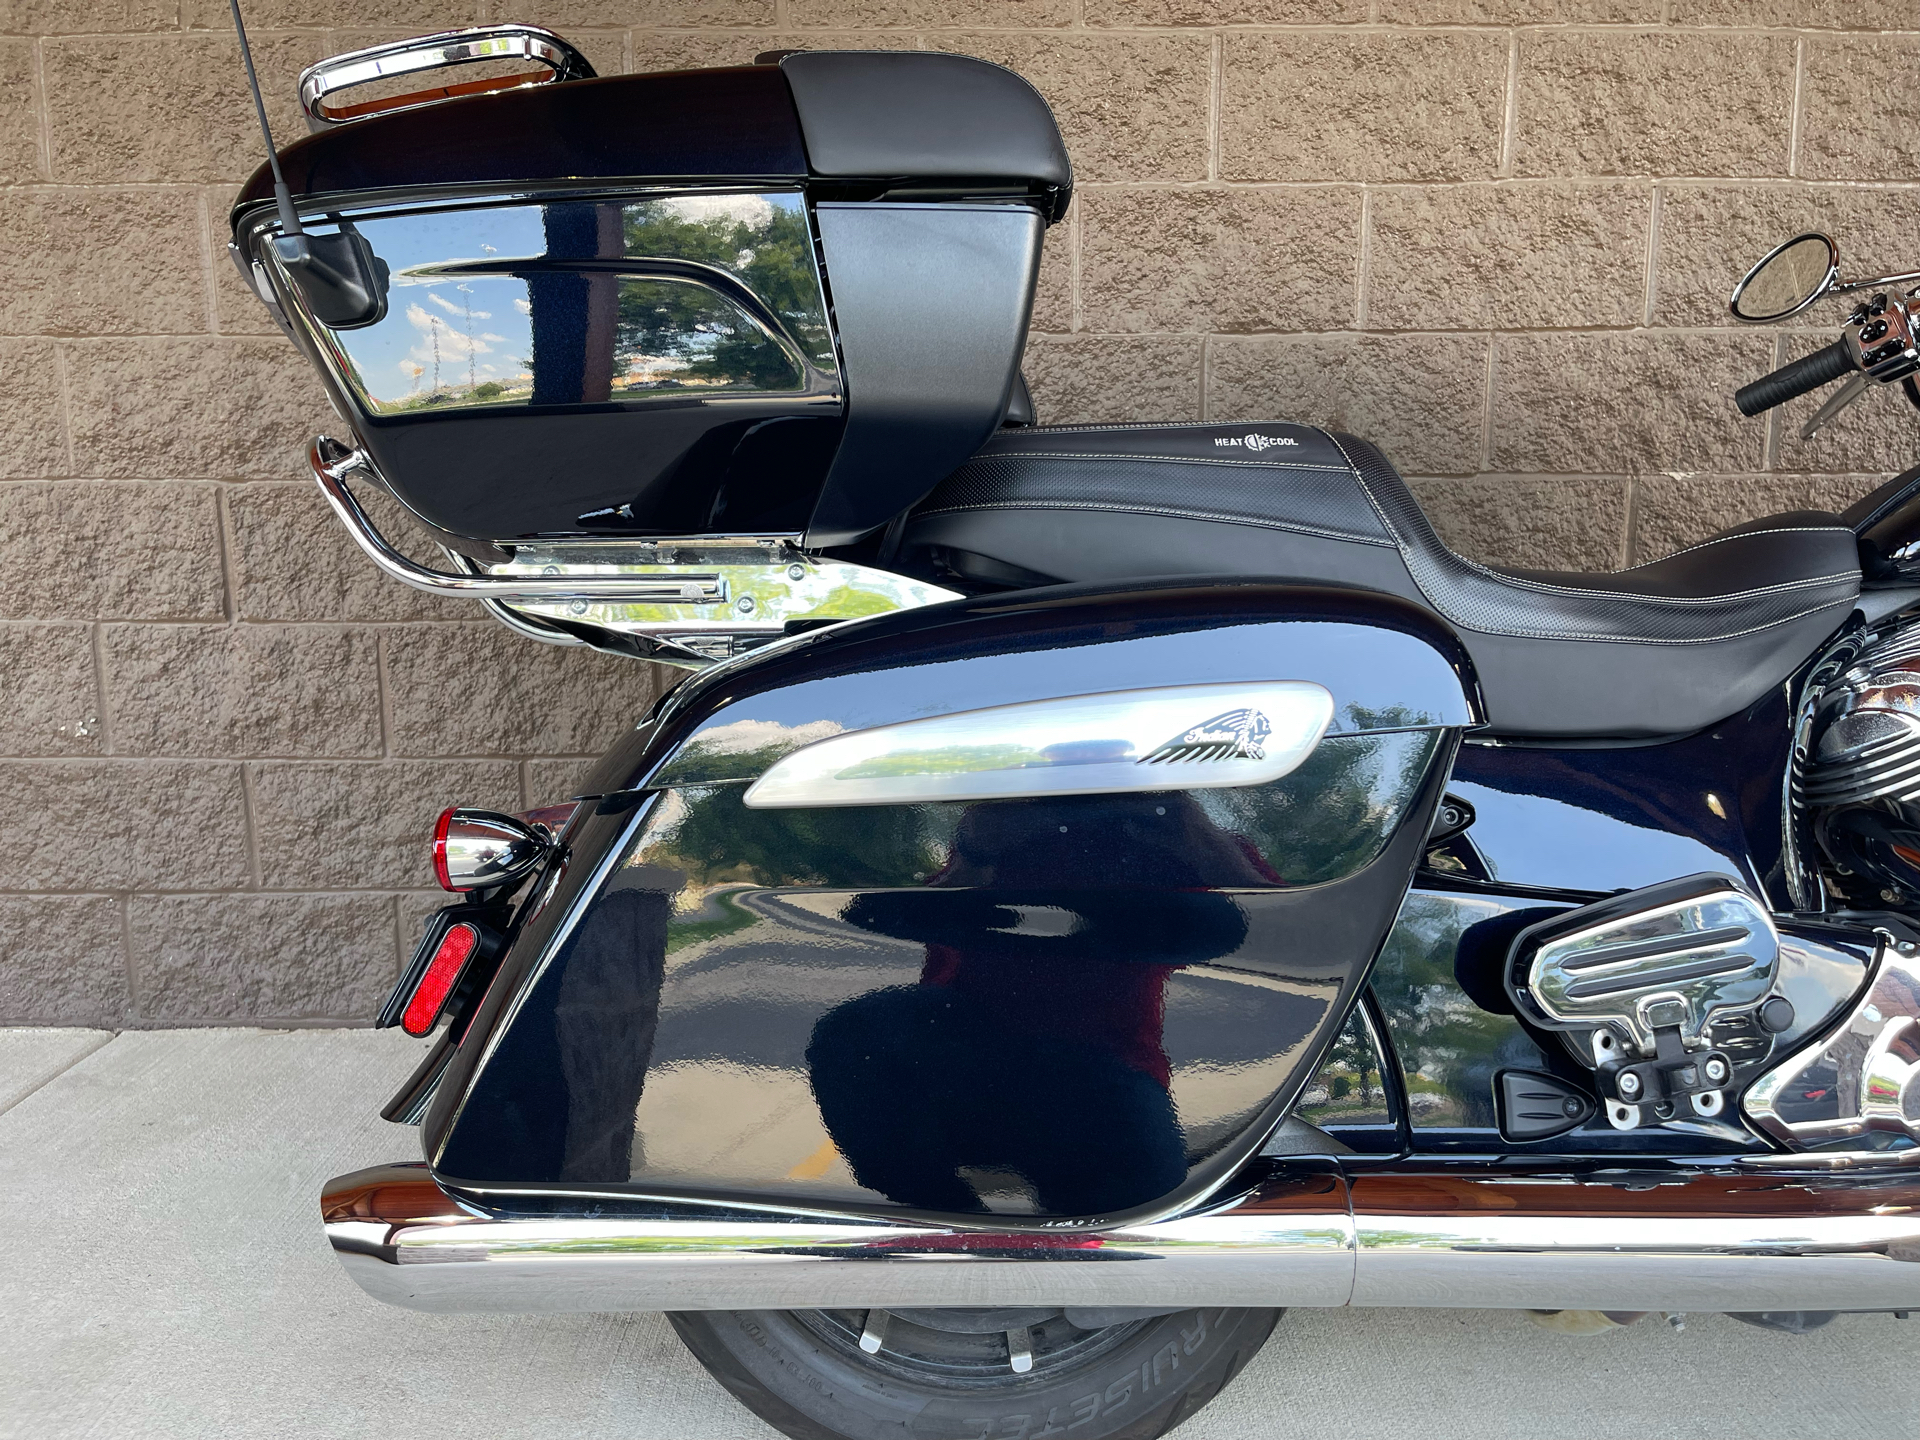 2022 Indian Motorcycle Roadmaster® Limited in Elkhart, Indiana - Photo 4